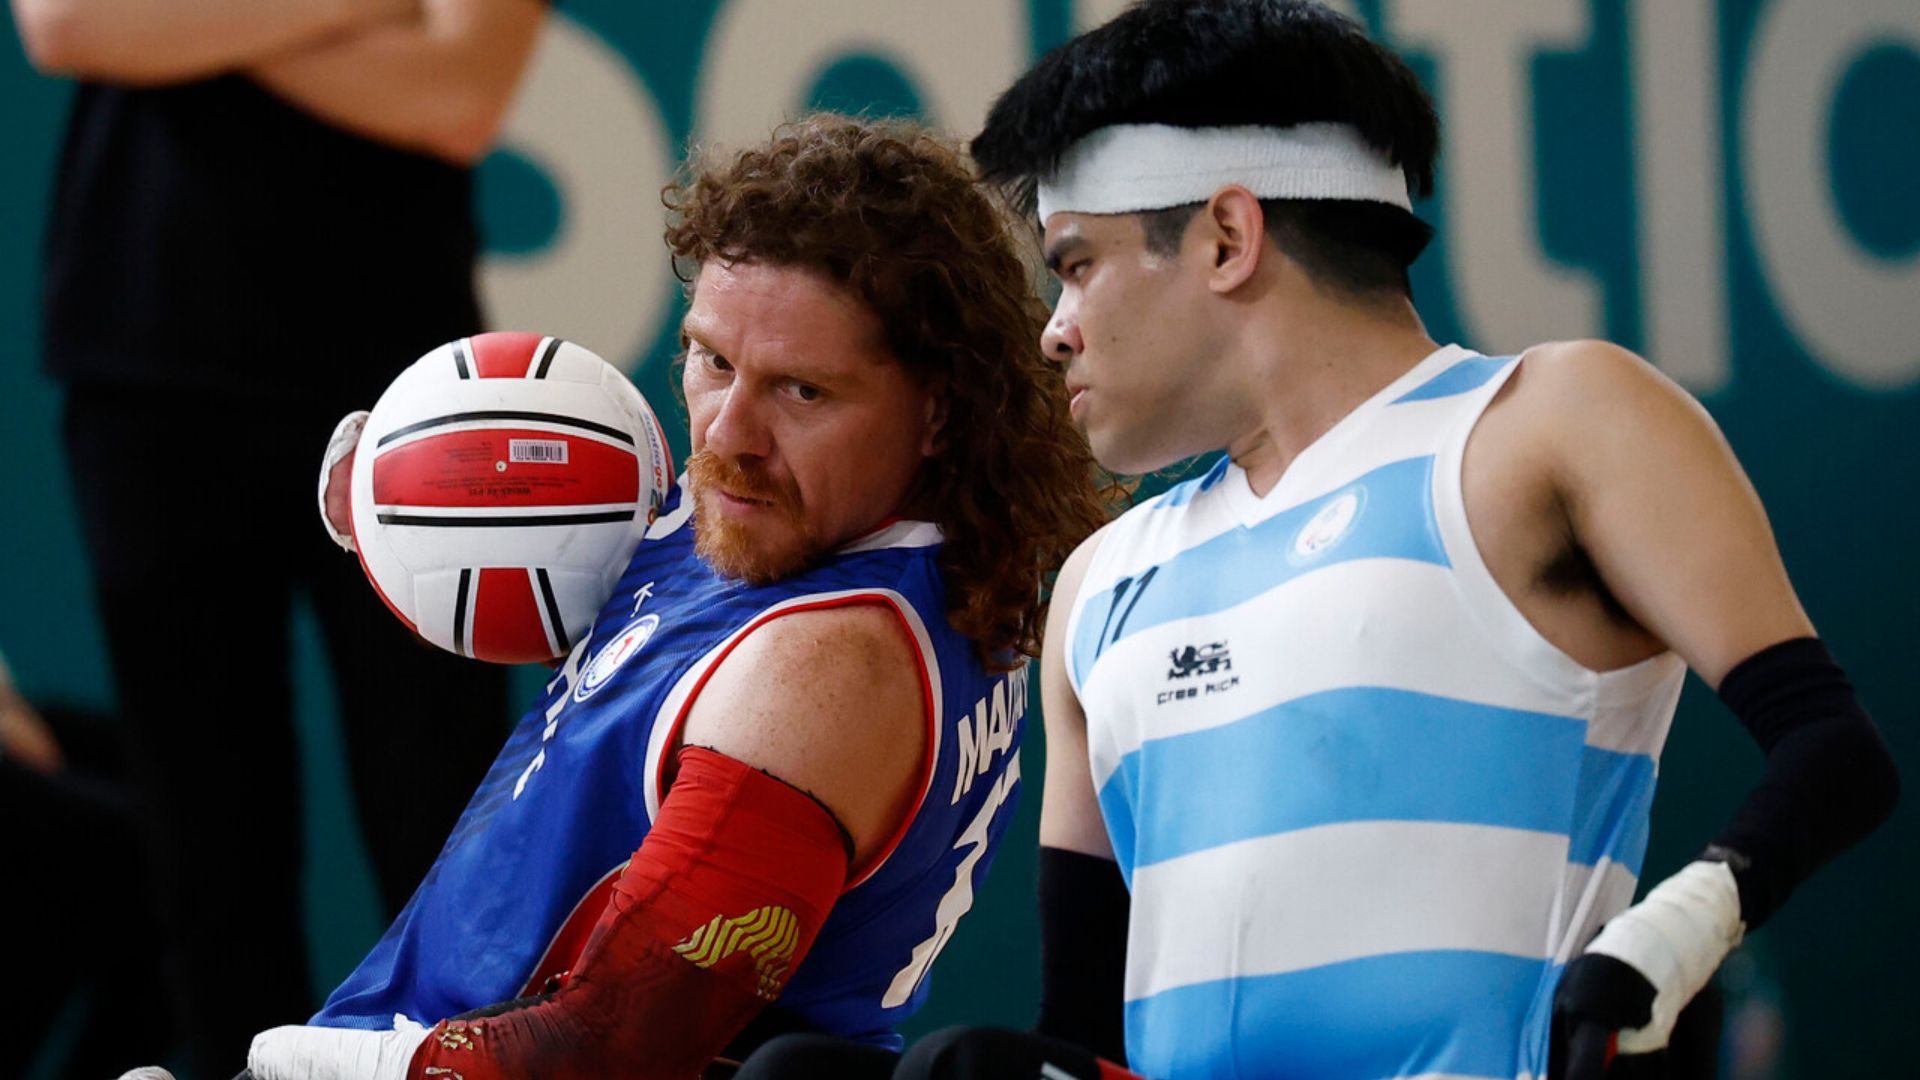 Argentina Secures Fifth Position in Wheelchair Rugby